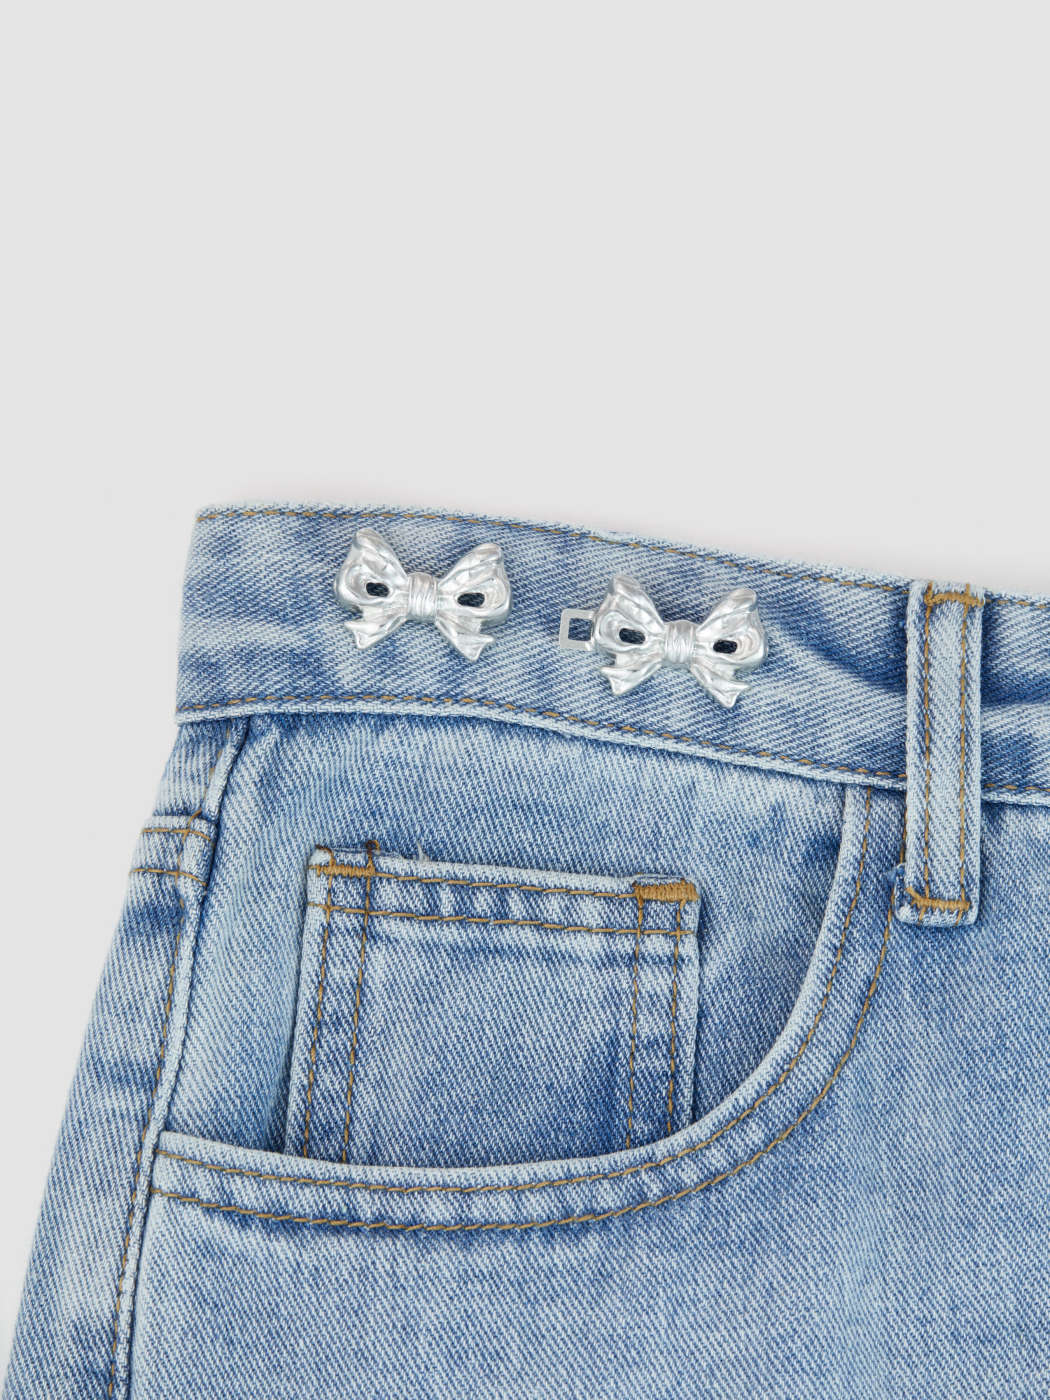 2 Packs Bowknot Button Pins For Jeans - Cider